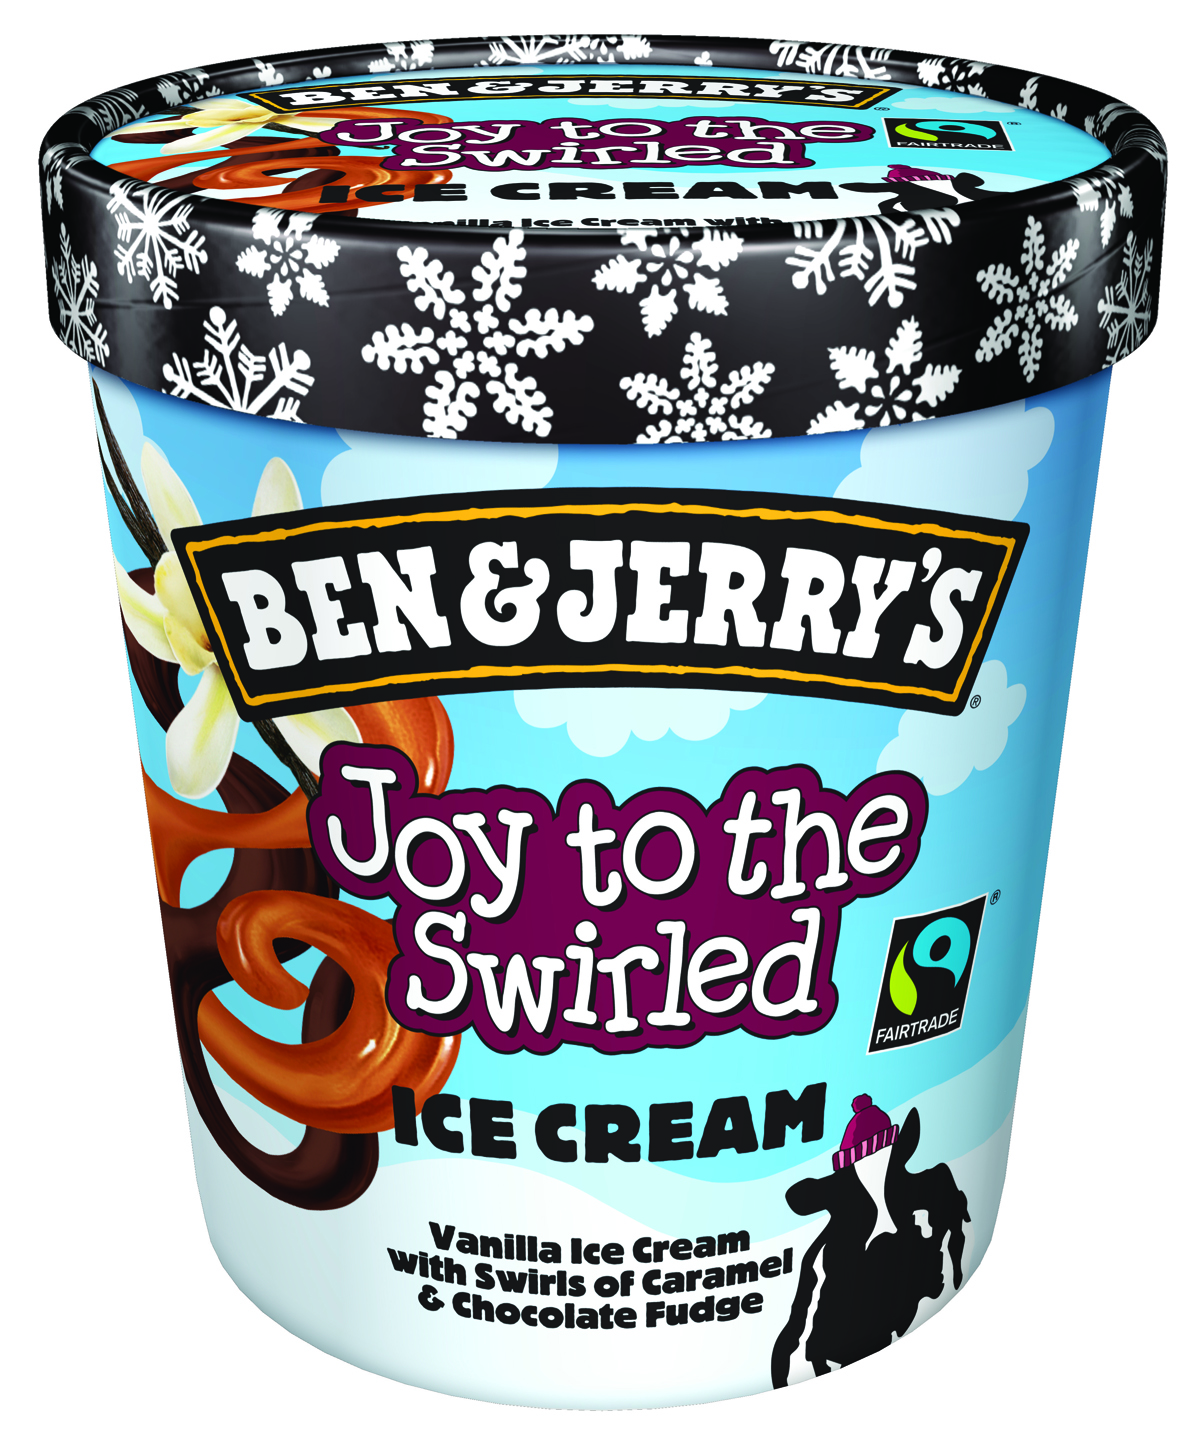 Ben & Jerry's is offering two new festive flavours - 'Joy to the Swirled' and 'Minter Wonderland'